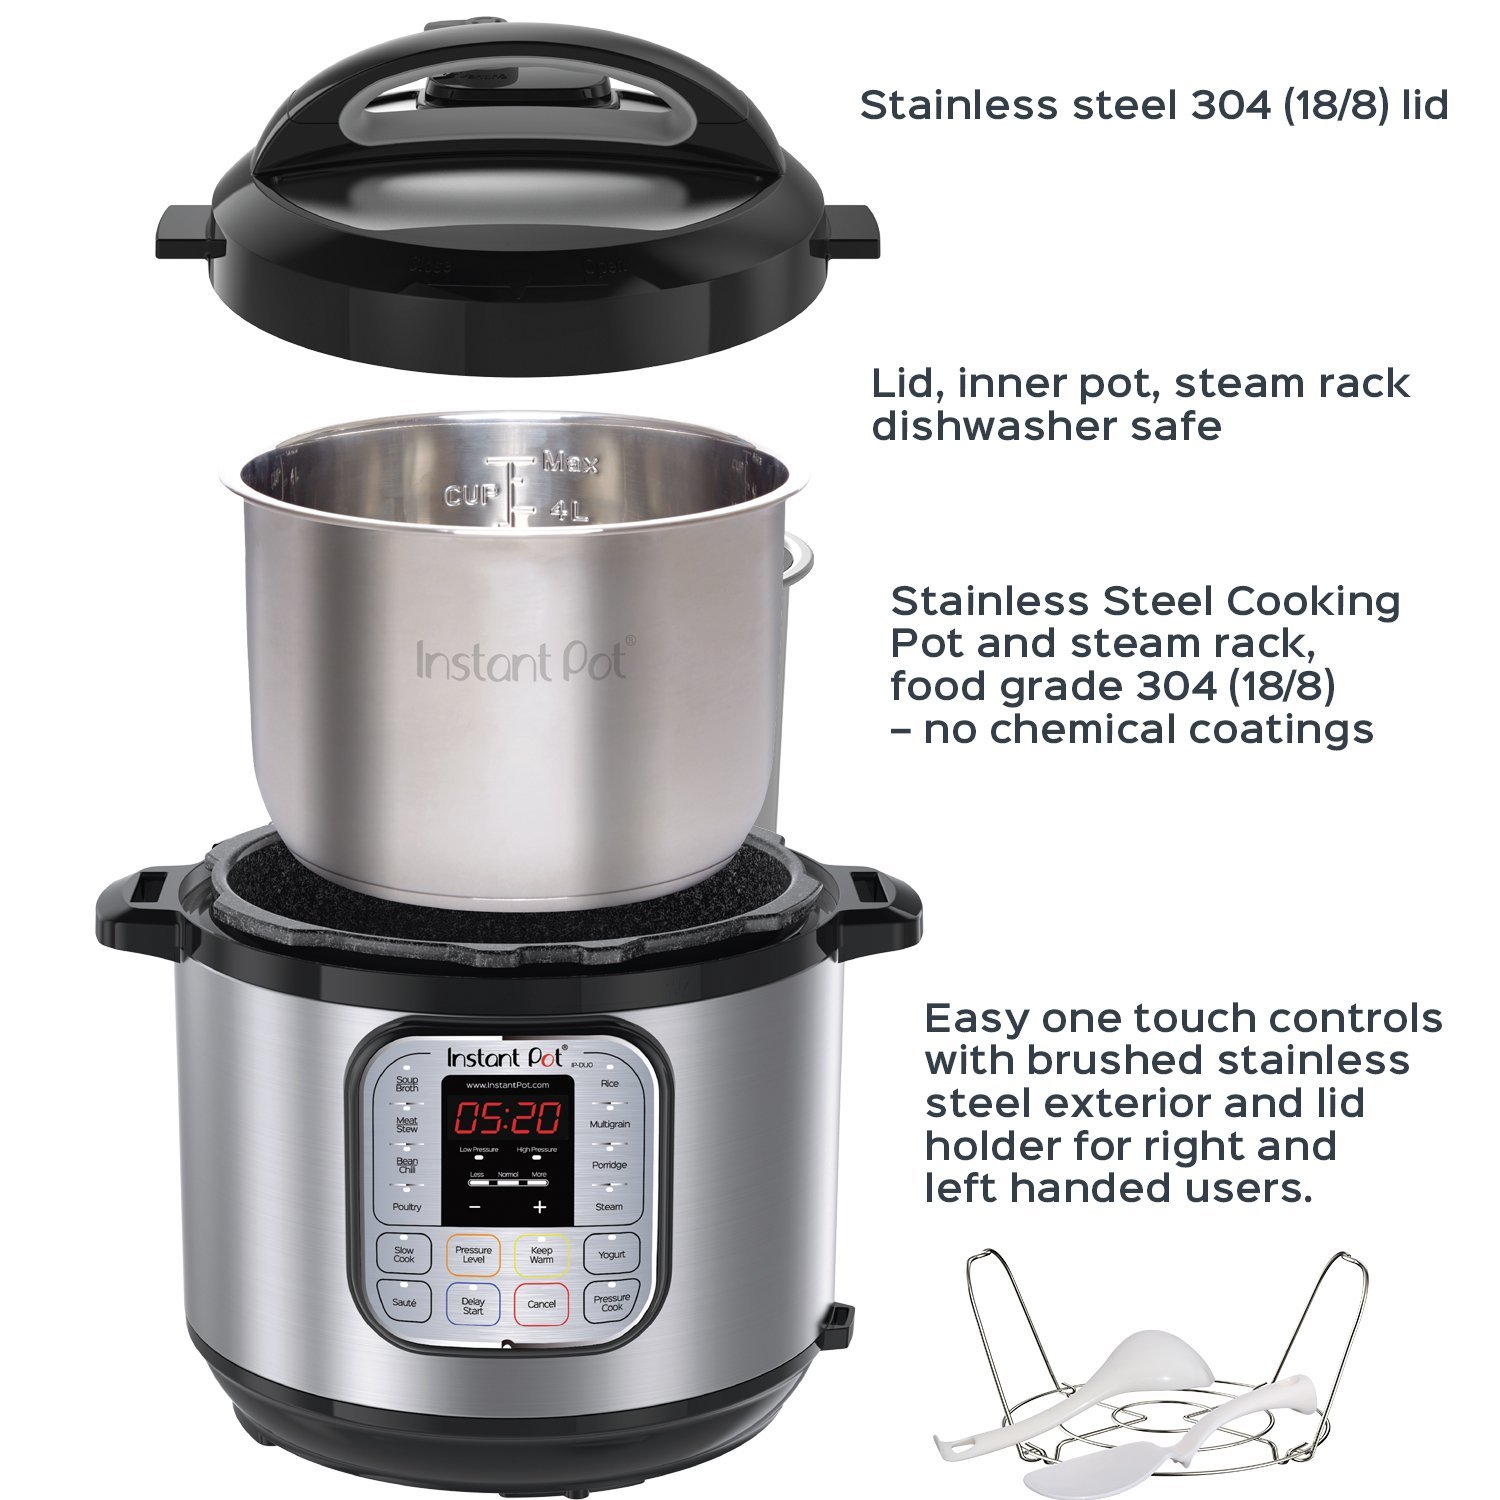 Instant Pot Programmable Pressure Cooker Review - Homesteading - Cooking